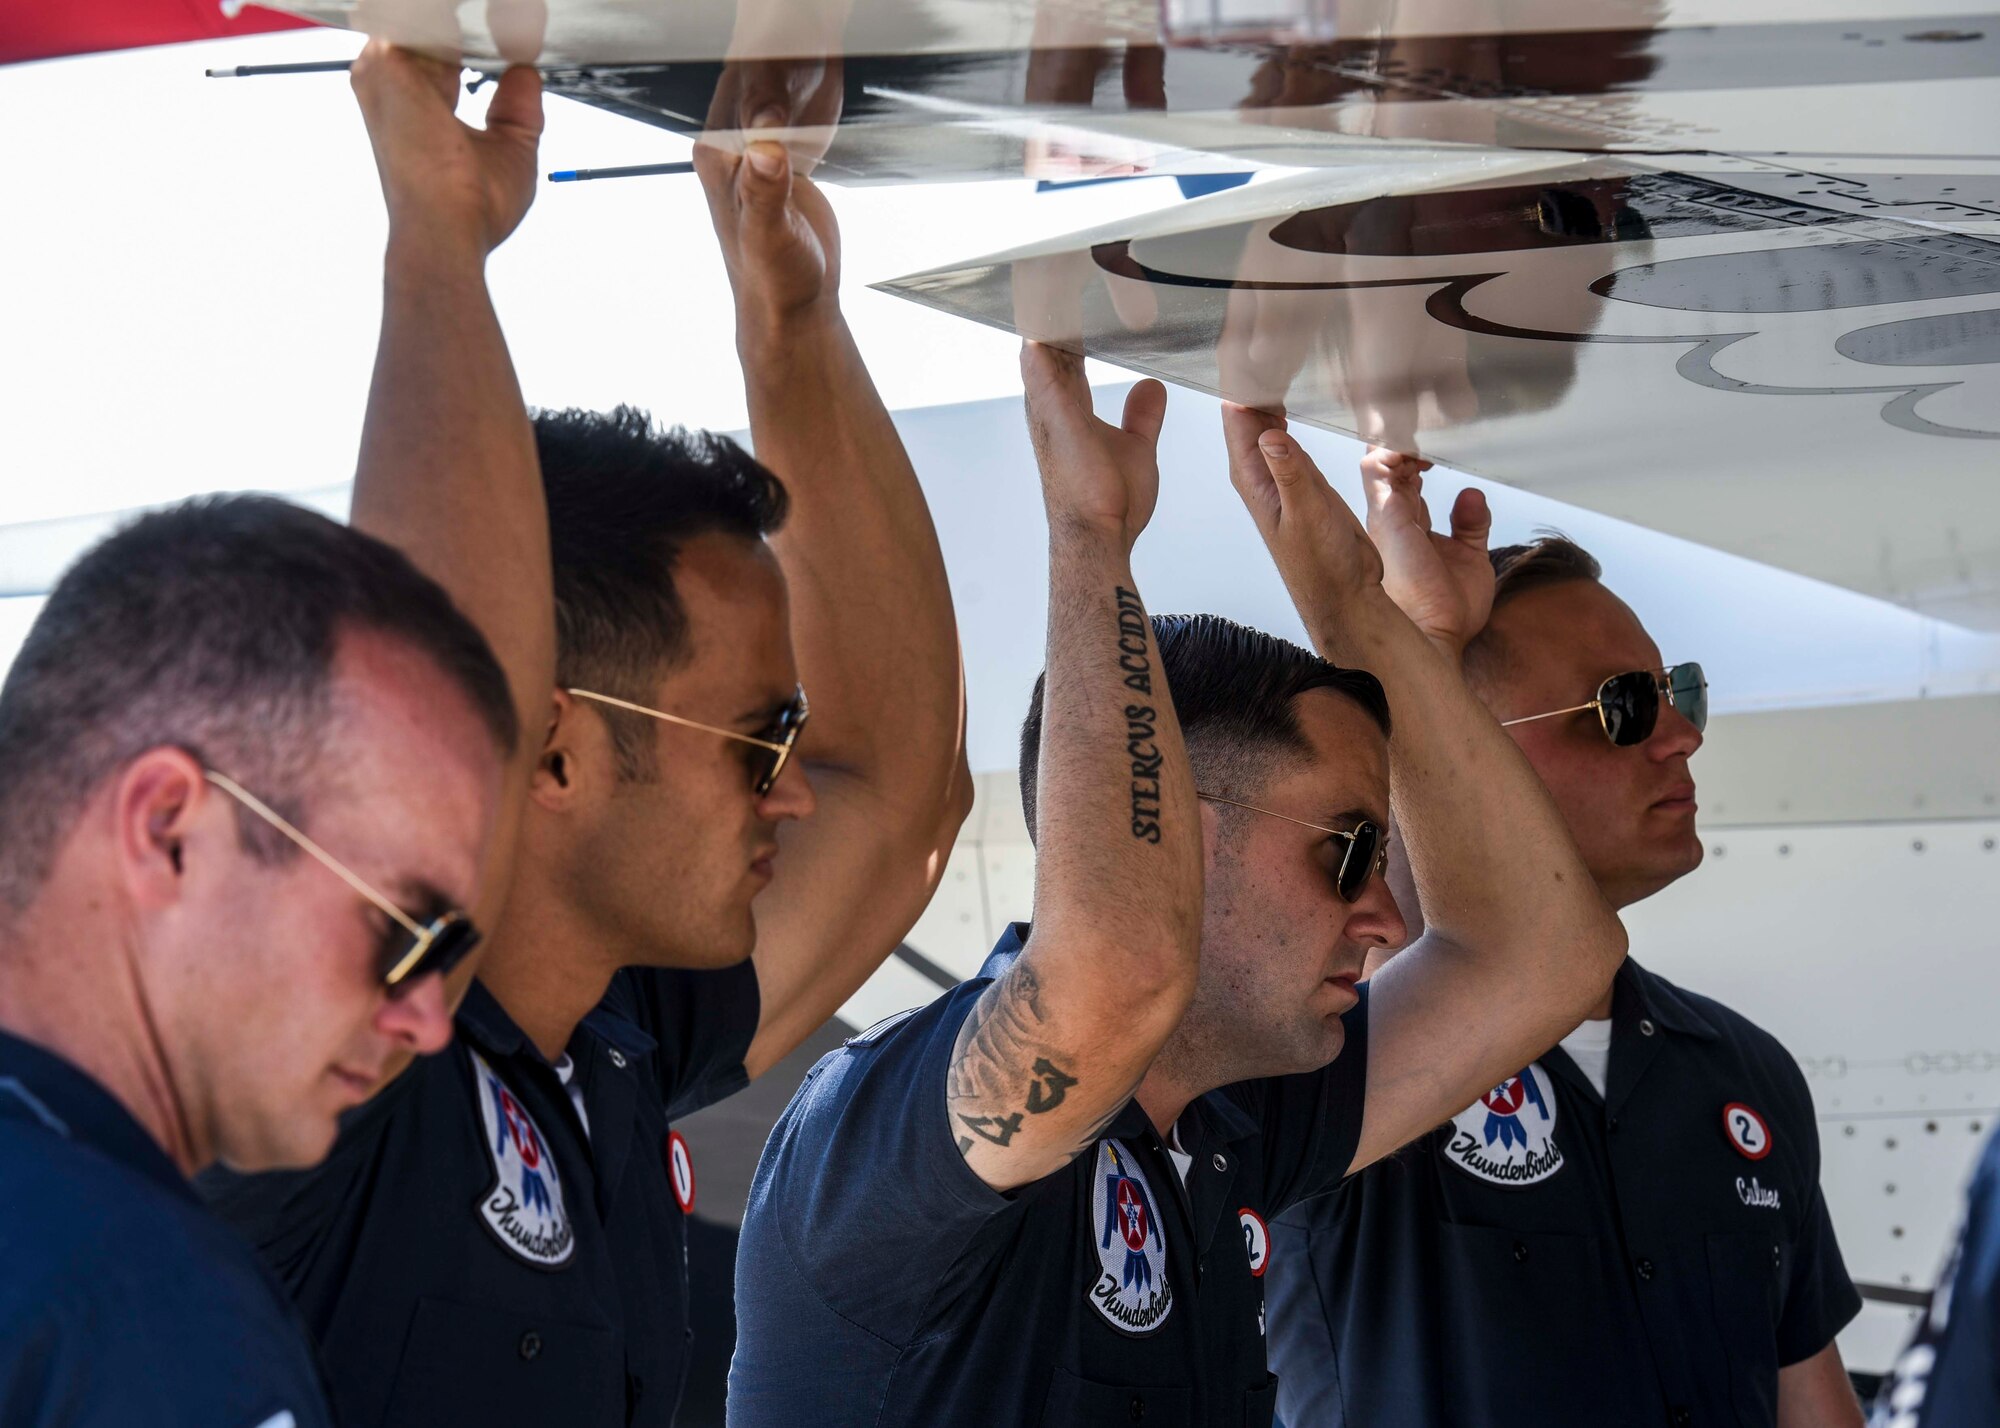 Members of the Thunderbird team prepares for a reenlistment ceremony with Scott Air Force Base personnel during the Scott Air Show, Scott Air Force Base, Ill., June 11, 2017. The base hosted the air show and open house to celebrate the 100th year of Scott AFB.  Over 50 aircraft, ranging from WWI’s Curtiss JN-4 Jenny to the currently utilized KC-135 Stratotanker, came to Scott, the fourth oldest Air Force base. Demonstrations included the Black Daggers, “Tora, Tora, Tora,” and the USAF Thunderbirds. Opened in 1917 and previously named Scott Field, the base has seen its mission evolve and expand to encompass a multitude of priorities, including aeromedical evacuation and communications.  Today, Scott is home to 31 mission partners and provides around-the-clock logistics support and rapid global mobility, carried out primarily by U.S. Transportation Command and Air Mobility Command.